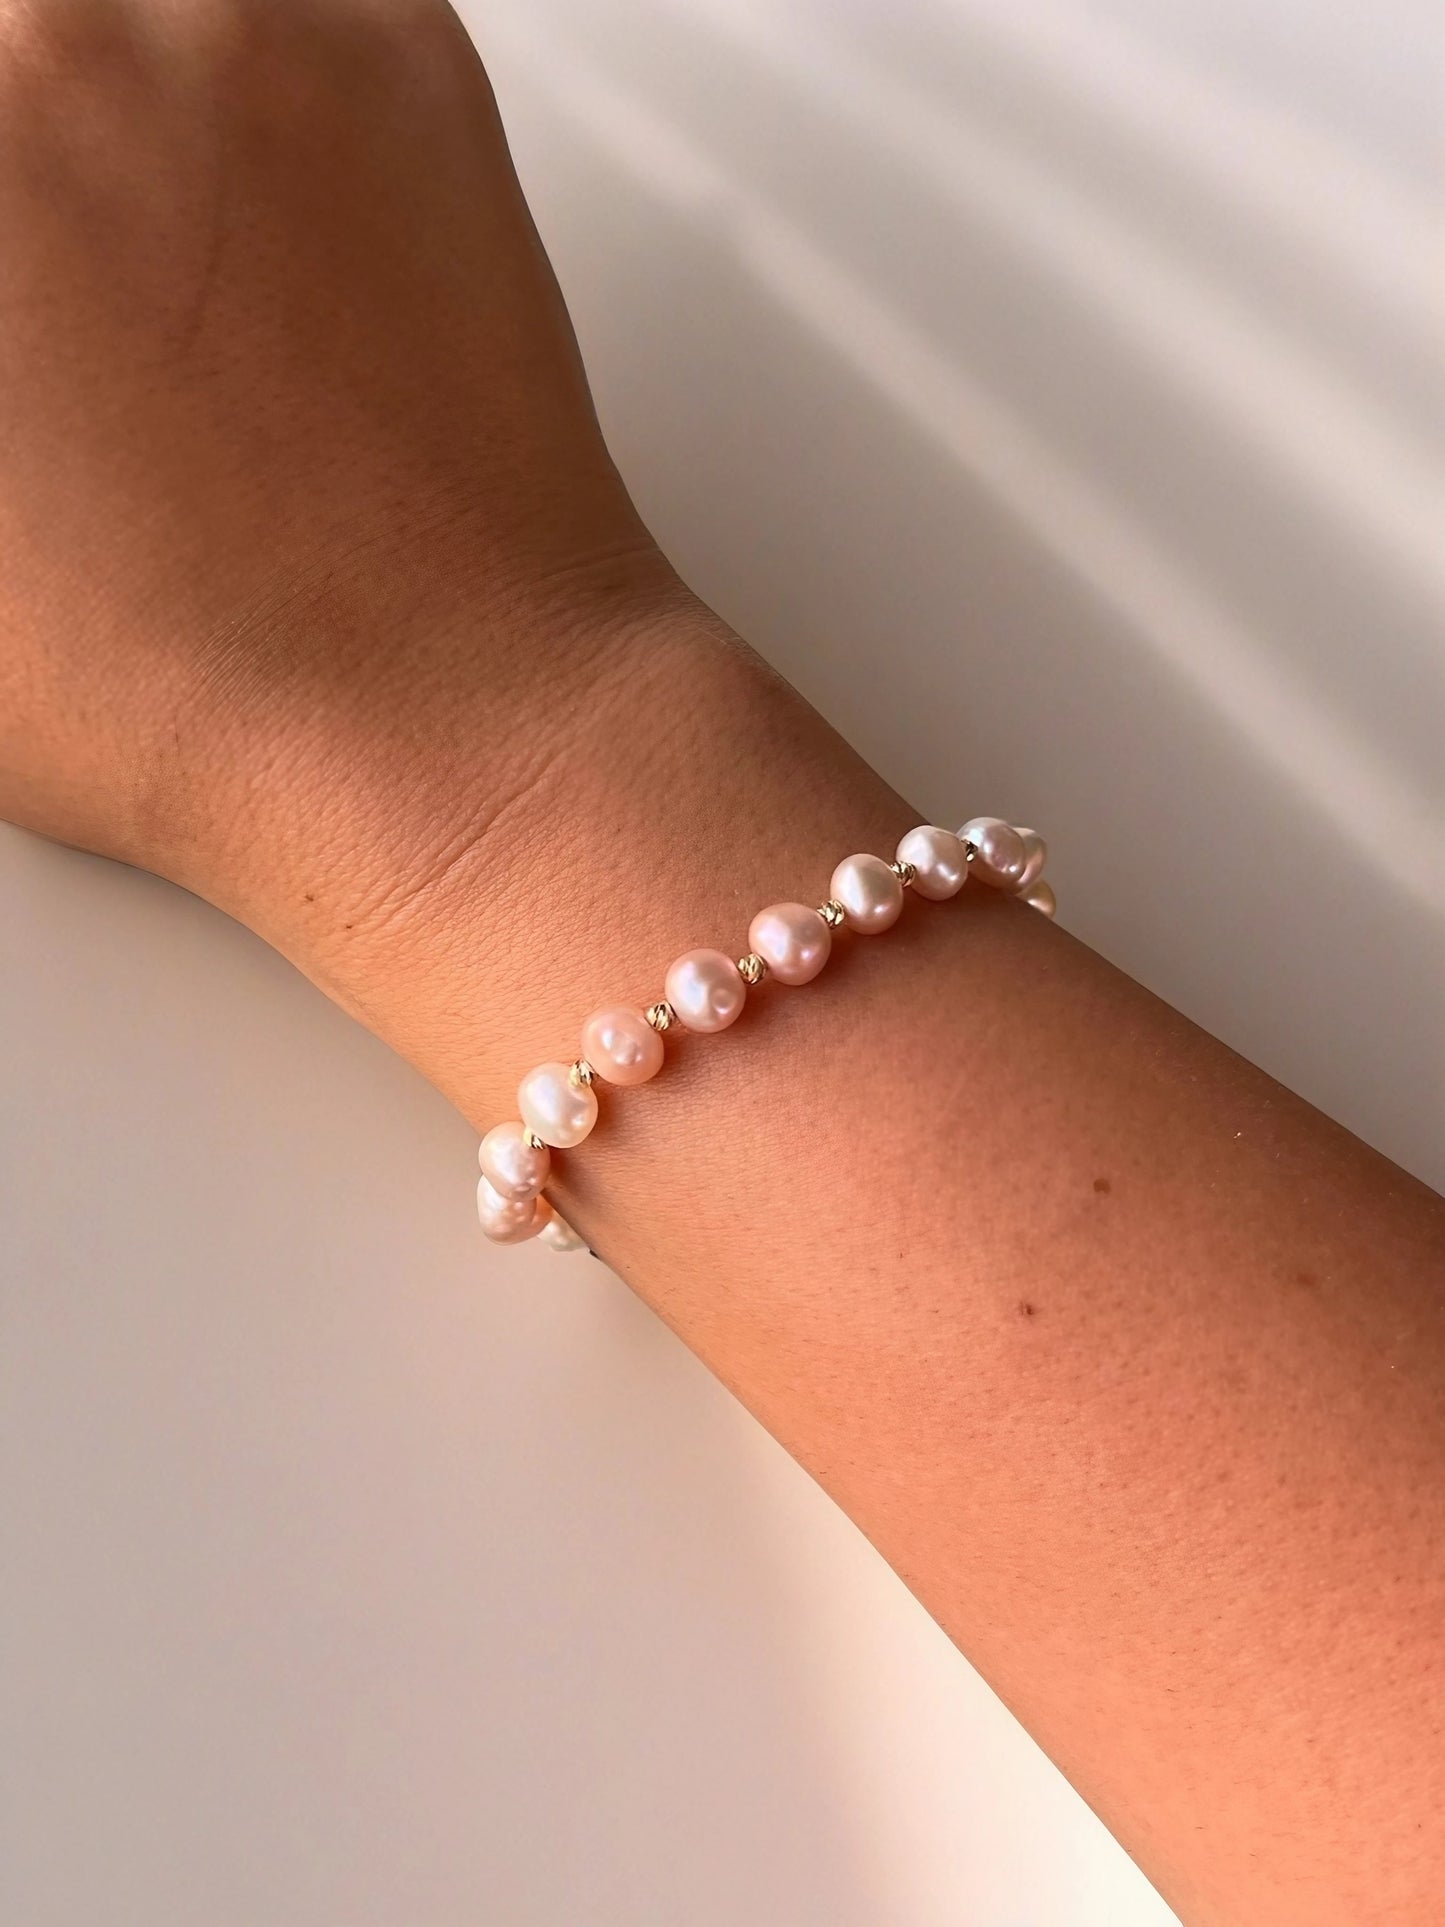 Serenity Pink Freshwater Pearls Bracelet with 18k Solid Gold Beads and findings | Ella Creations Jewelry